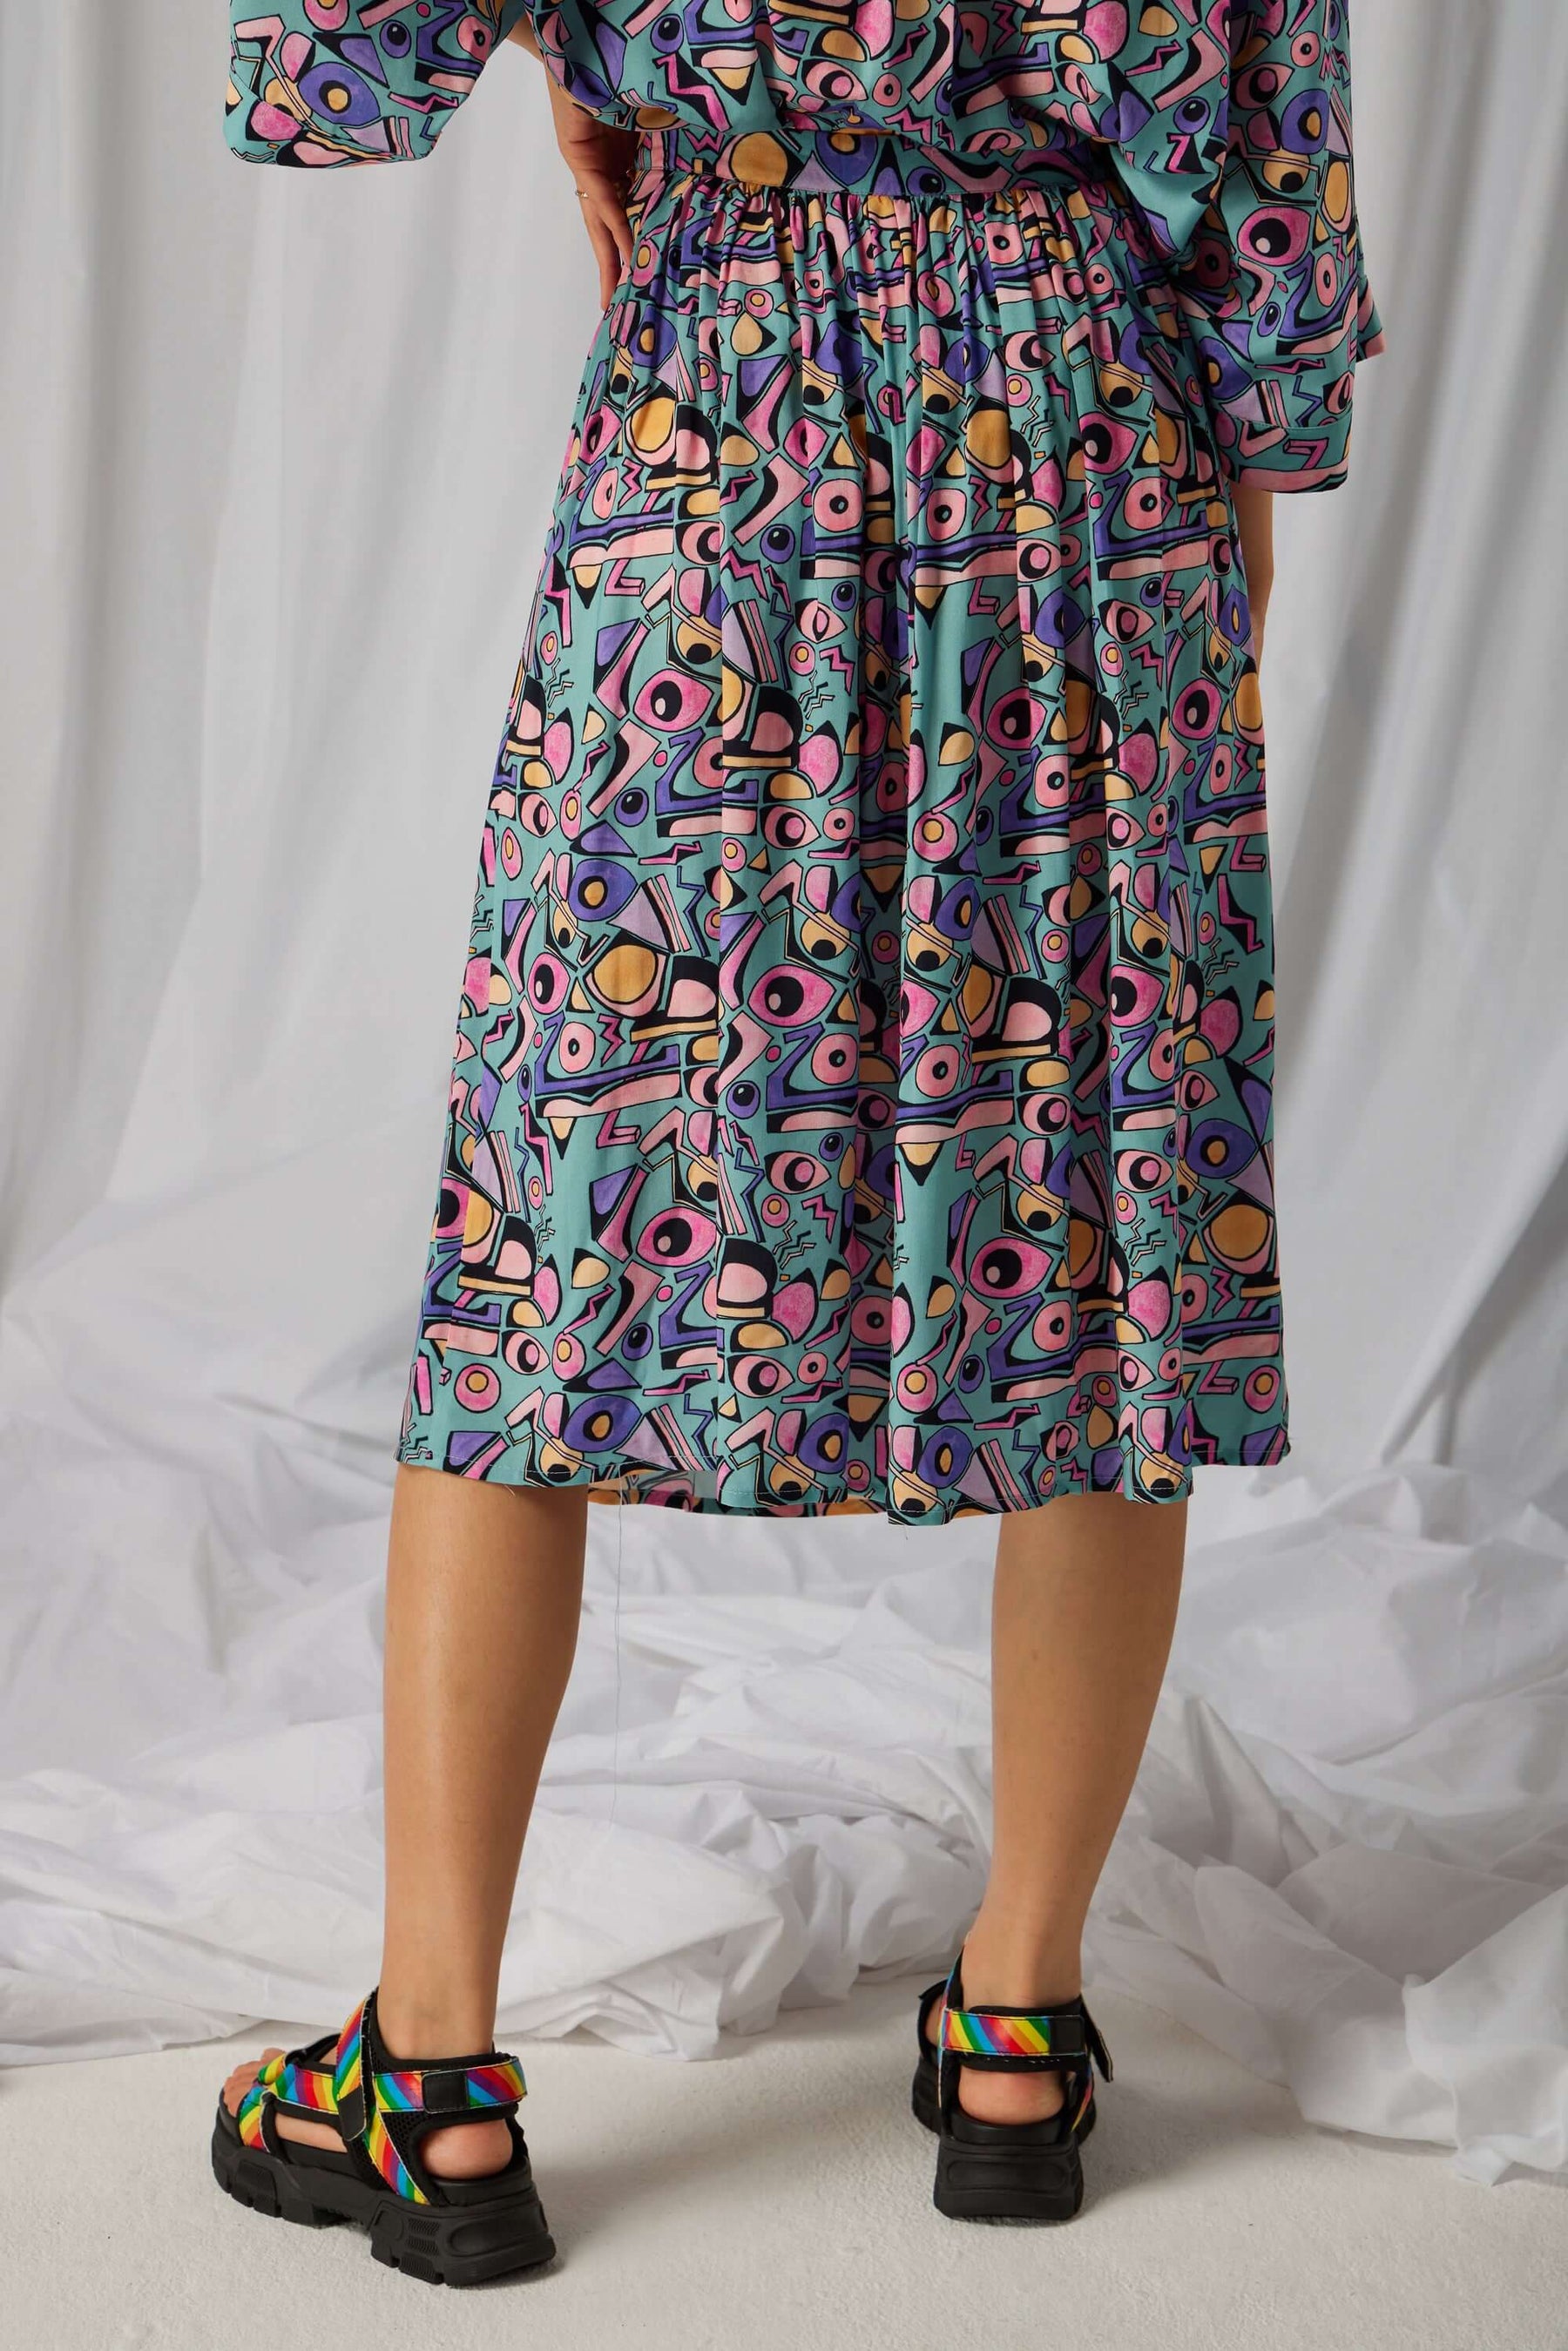 Orso skirt in Miami Factory print